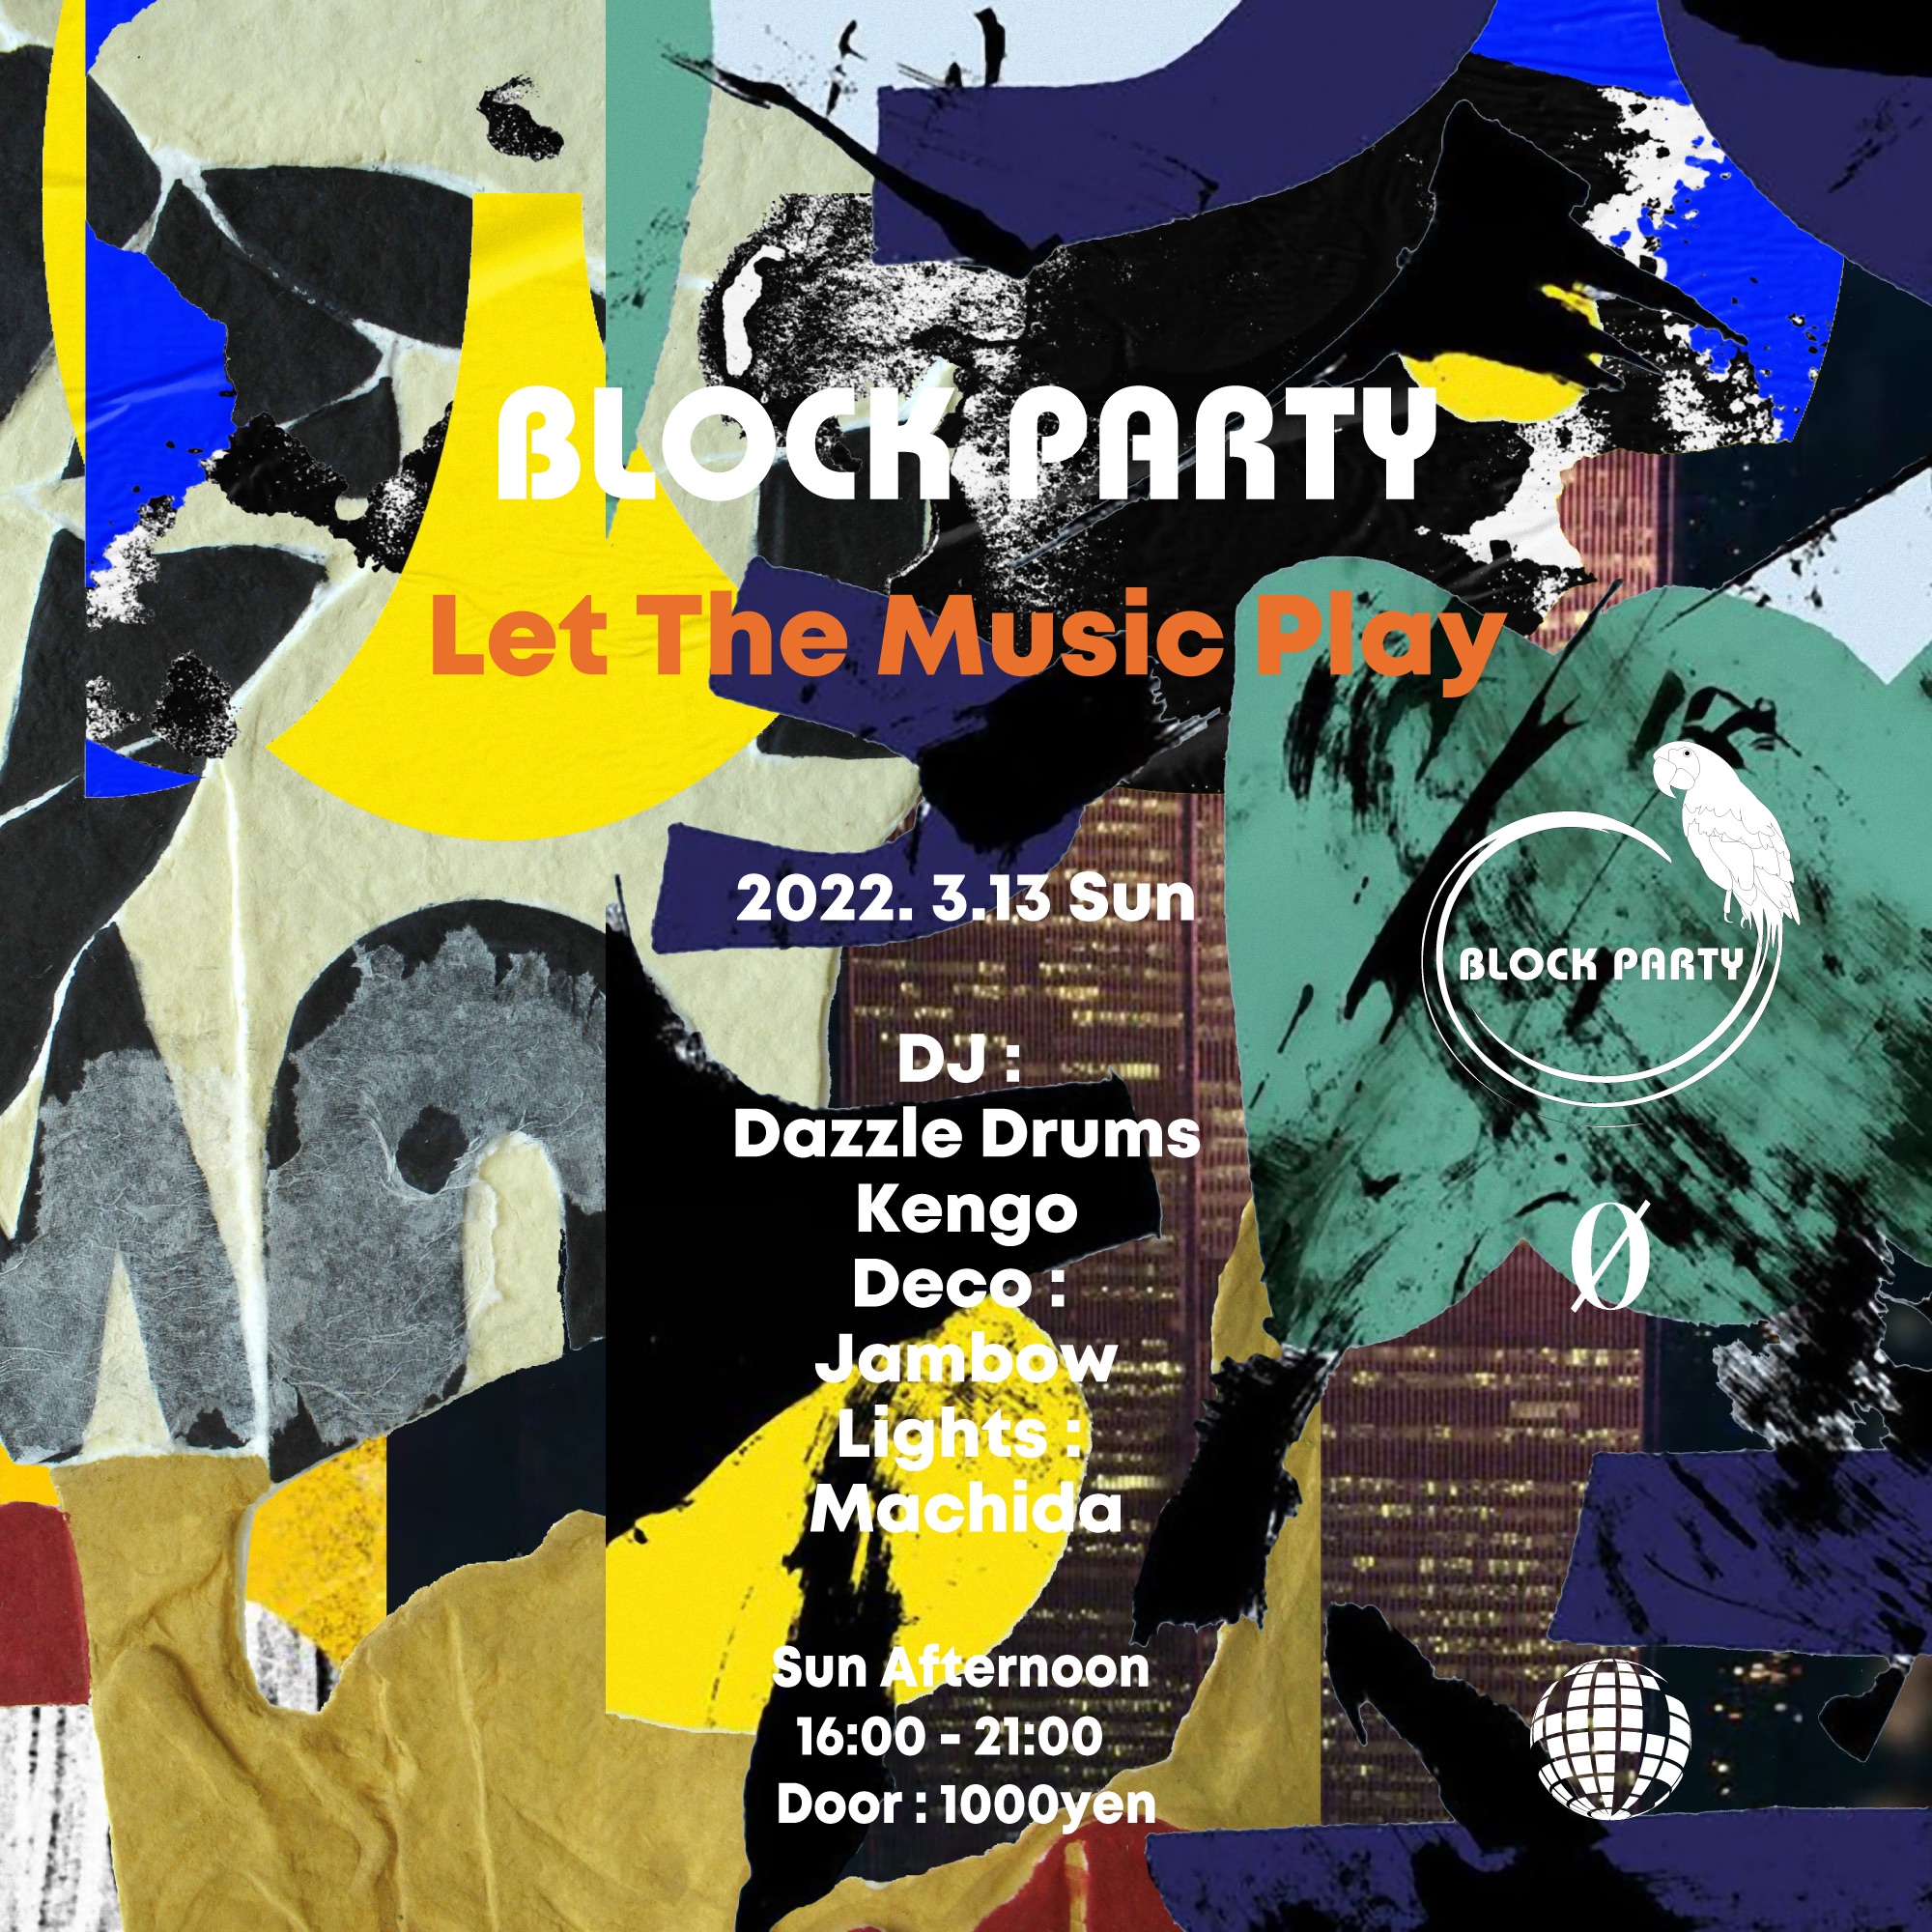 3.13.22 (Sun Afternoon) Block Party “Let The Music Play” @ 0 Zero